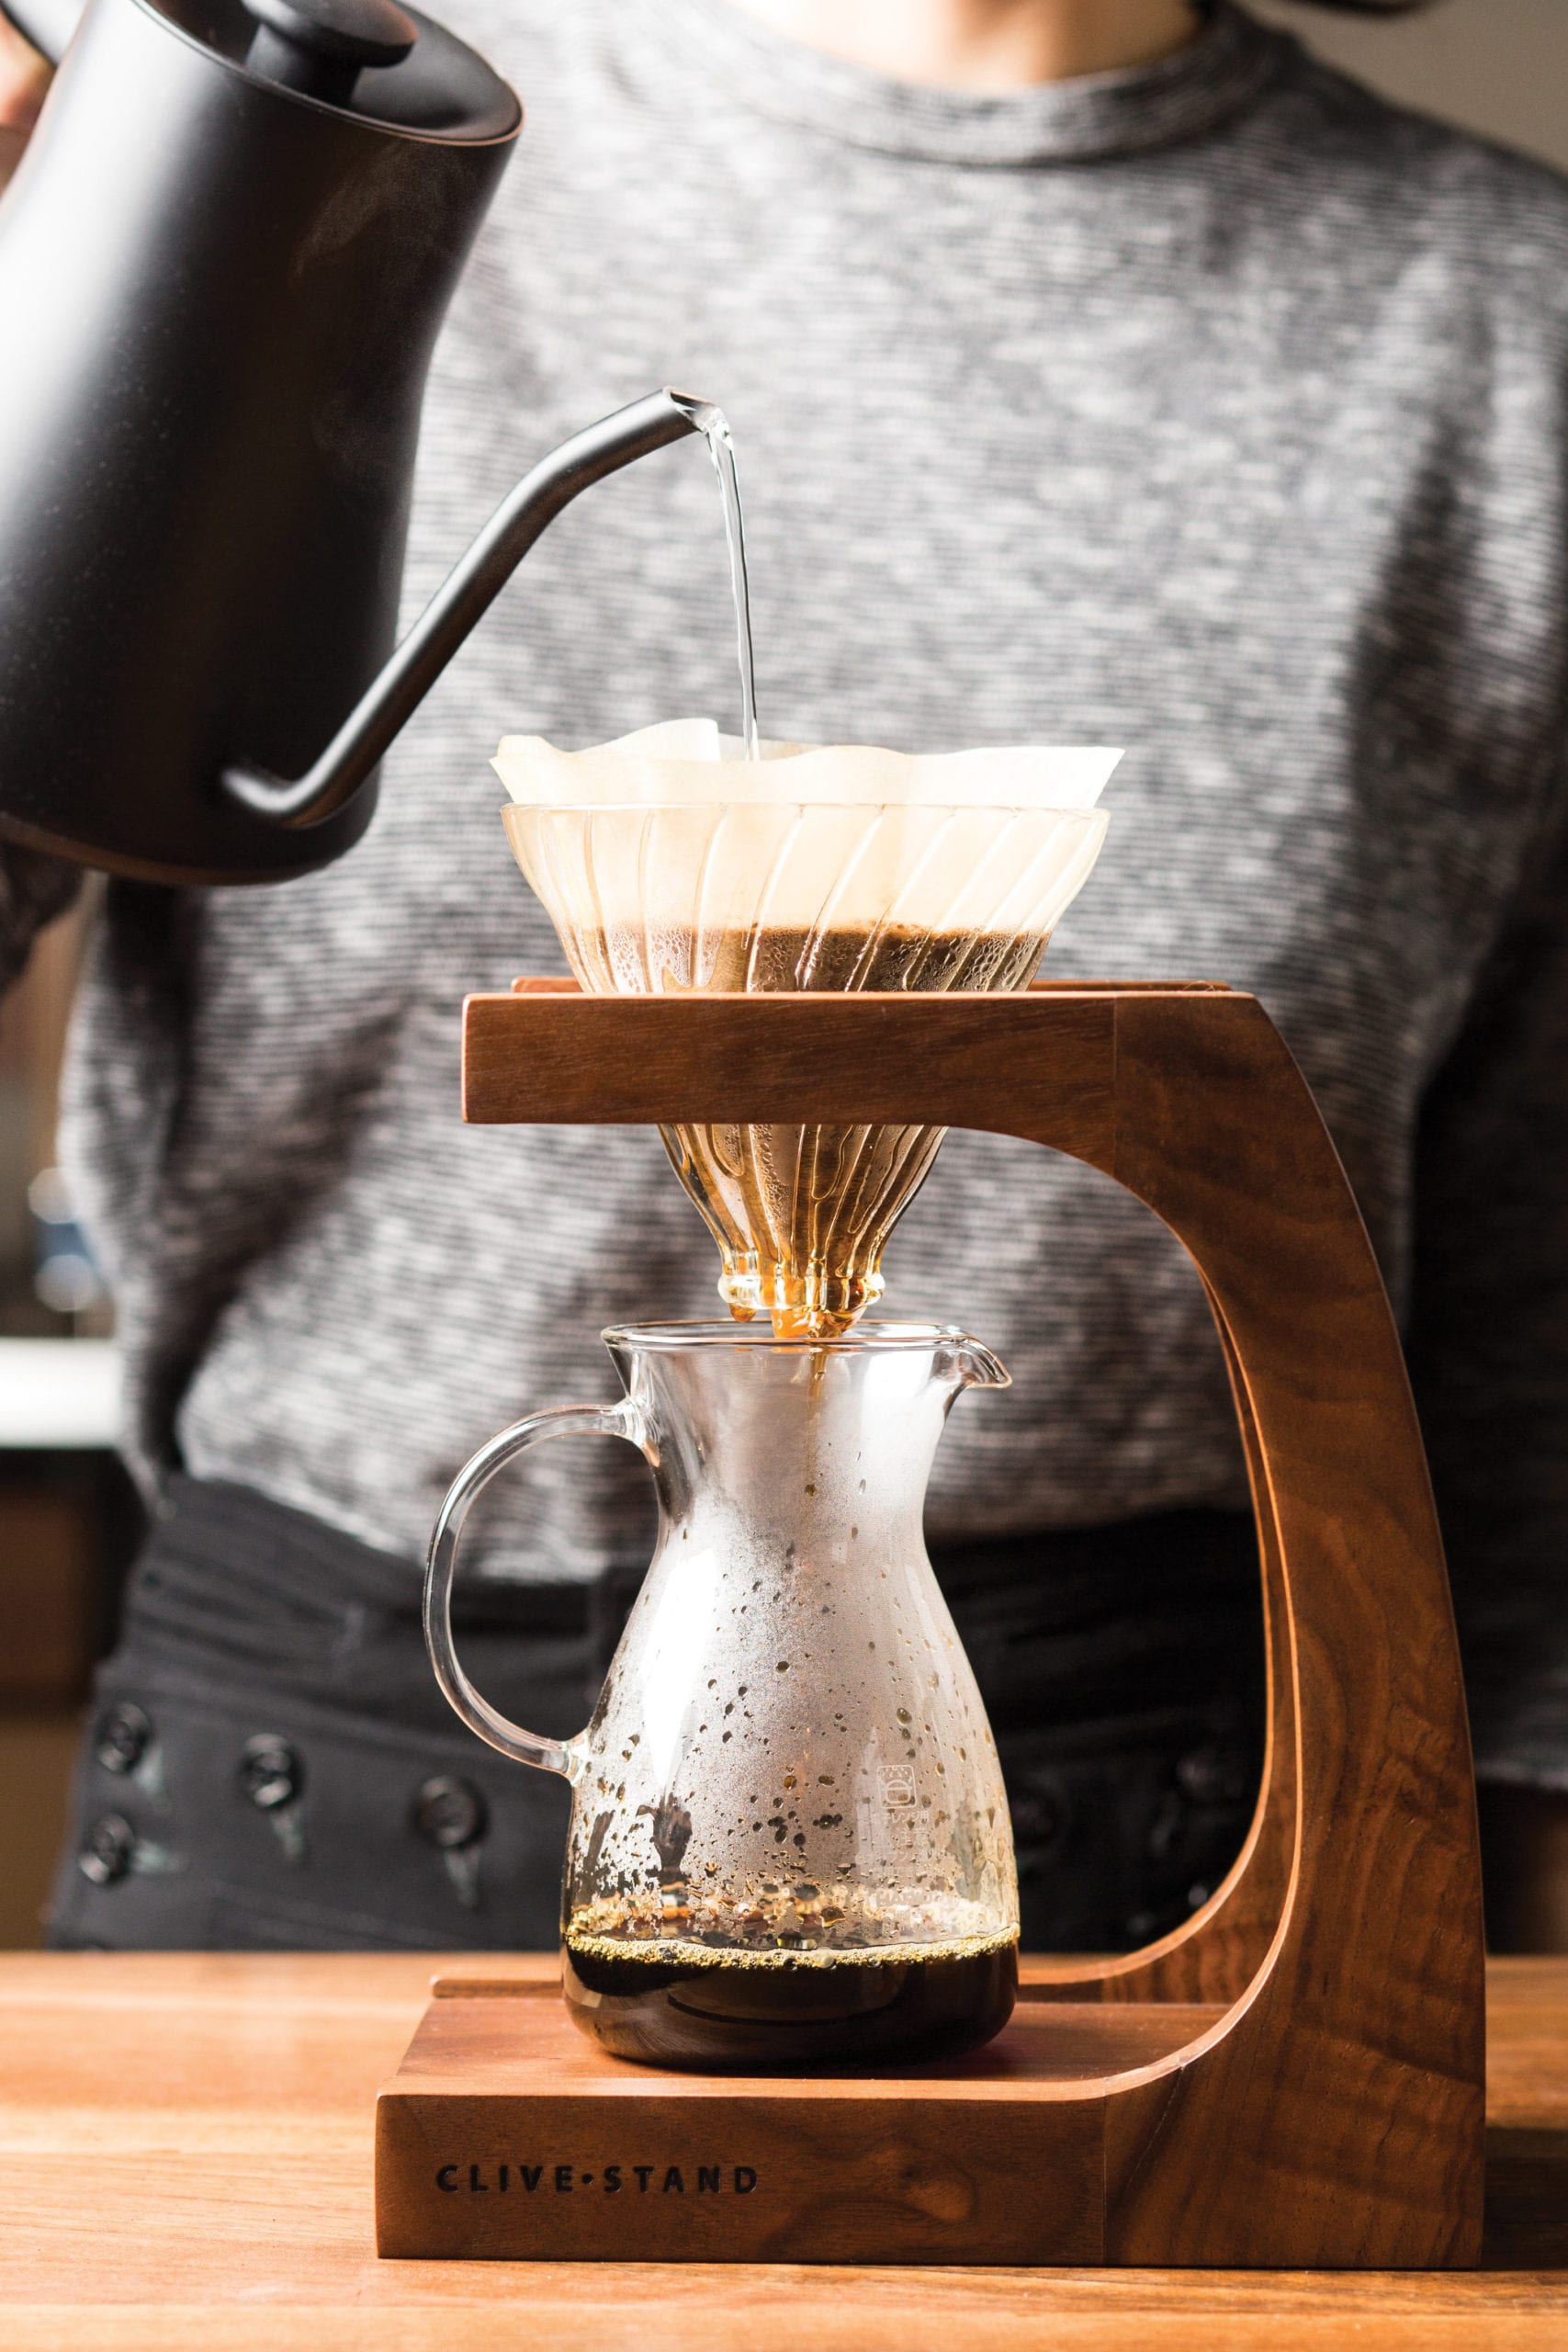 The Vietnamese Coffee Filter That Slows Things Down - Eater